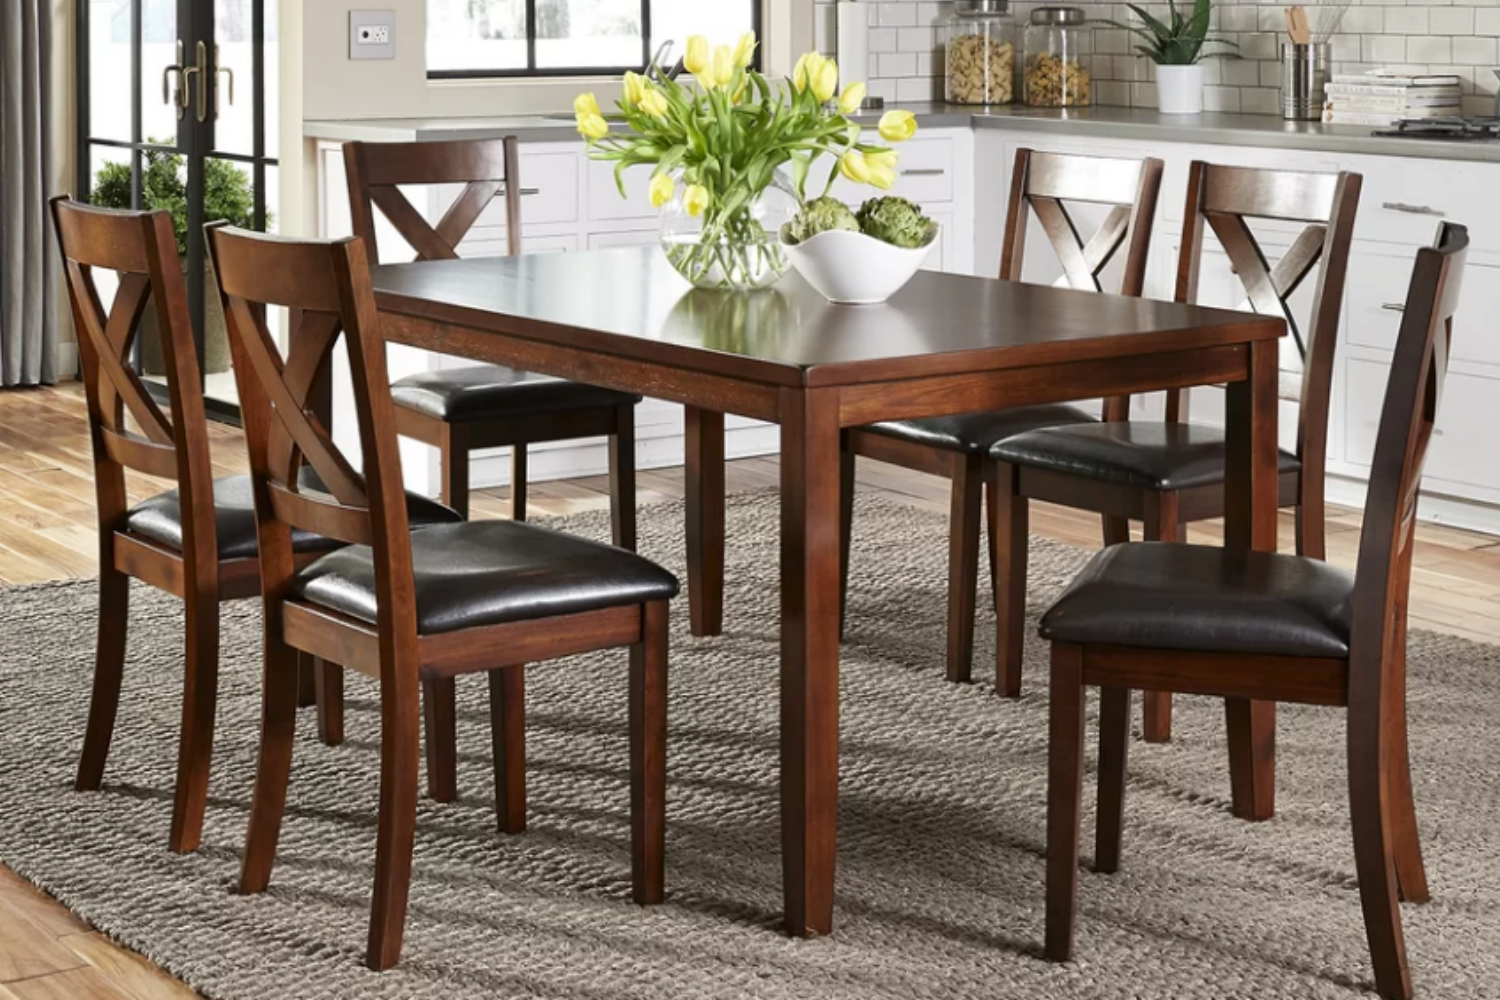 Best Deals Mn Black Friday Dining Room Chairs